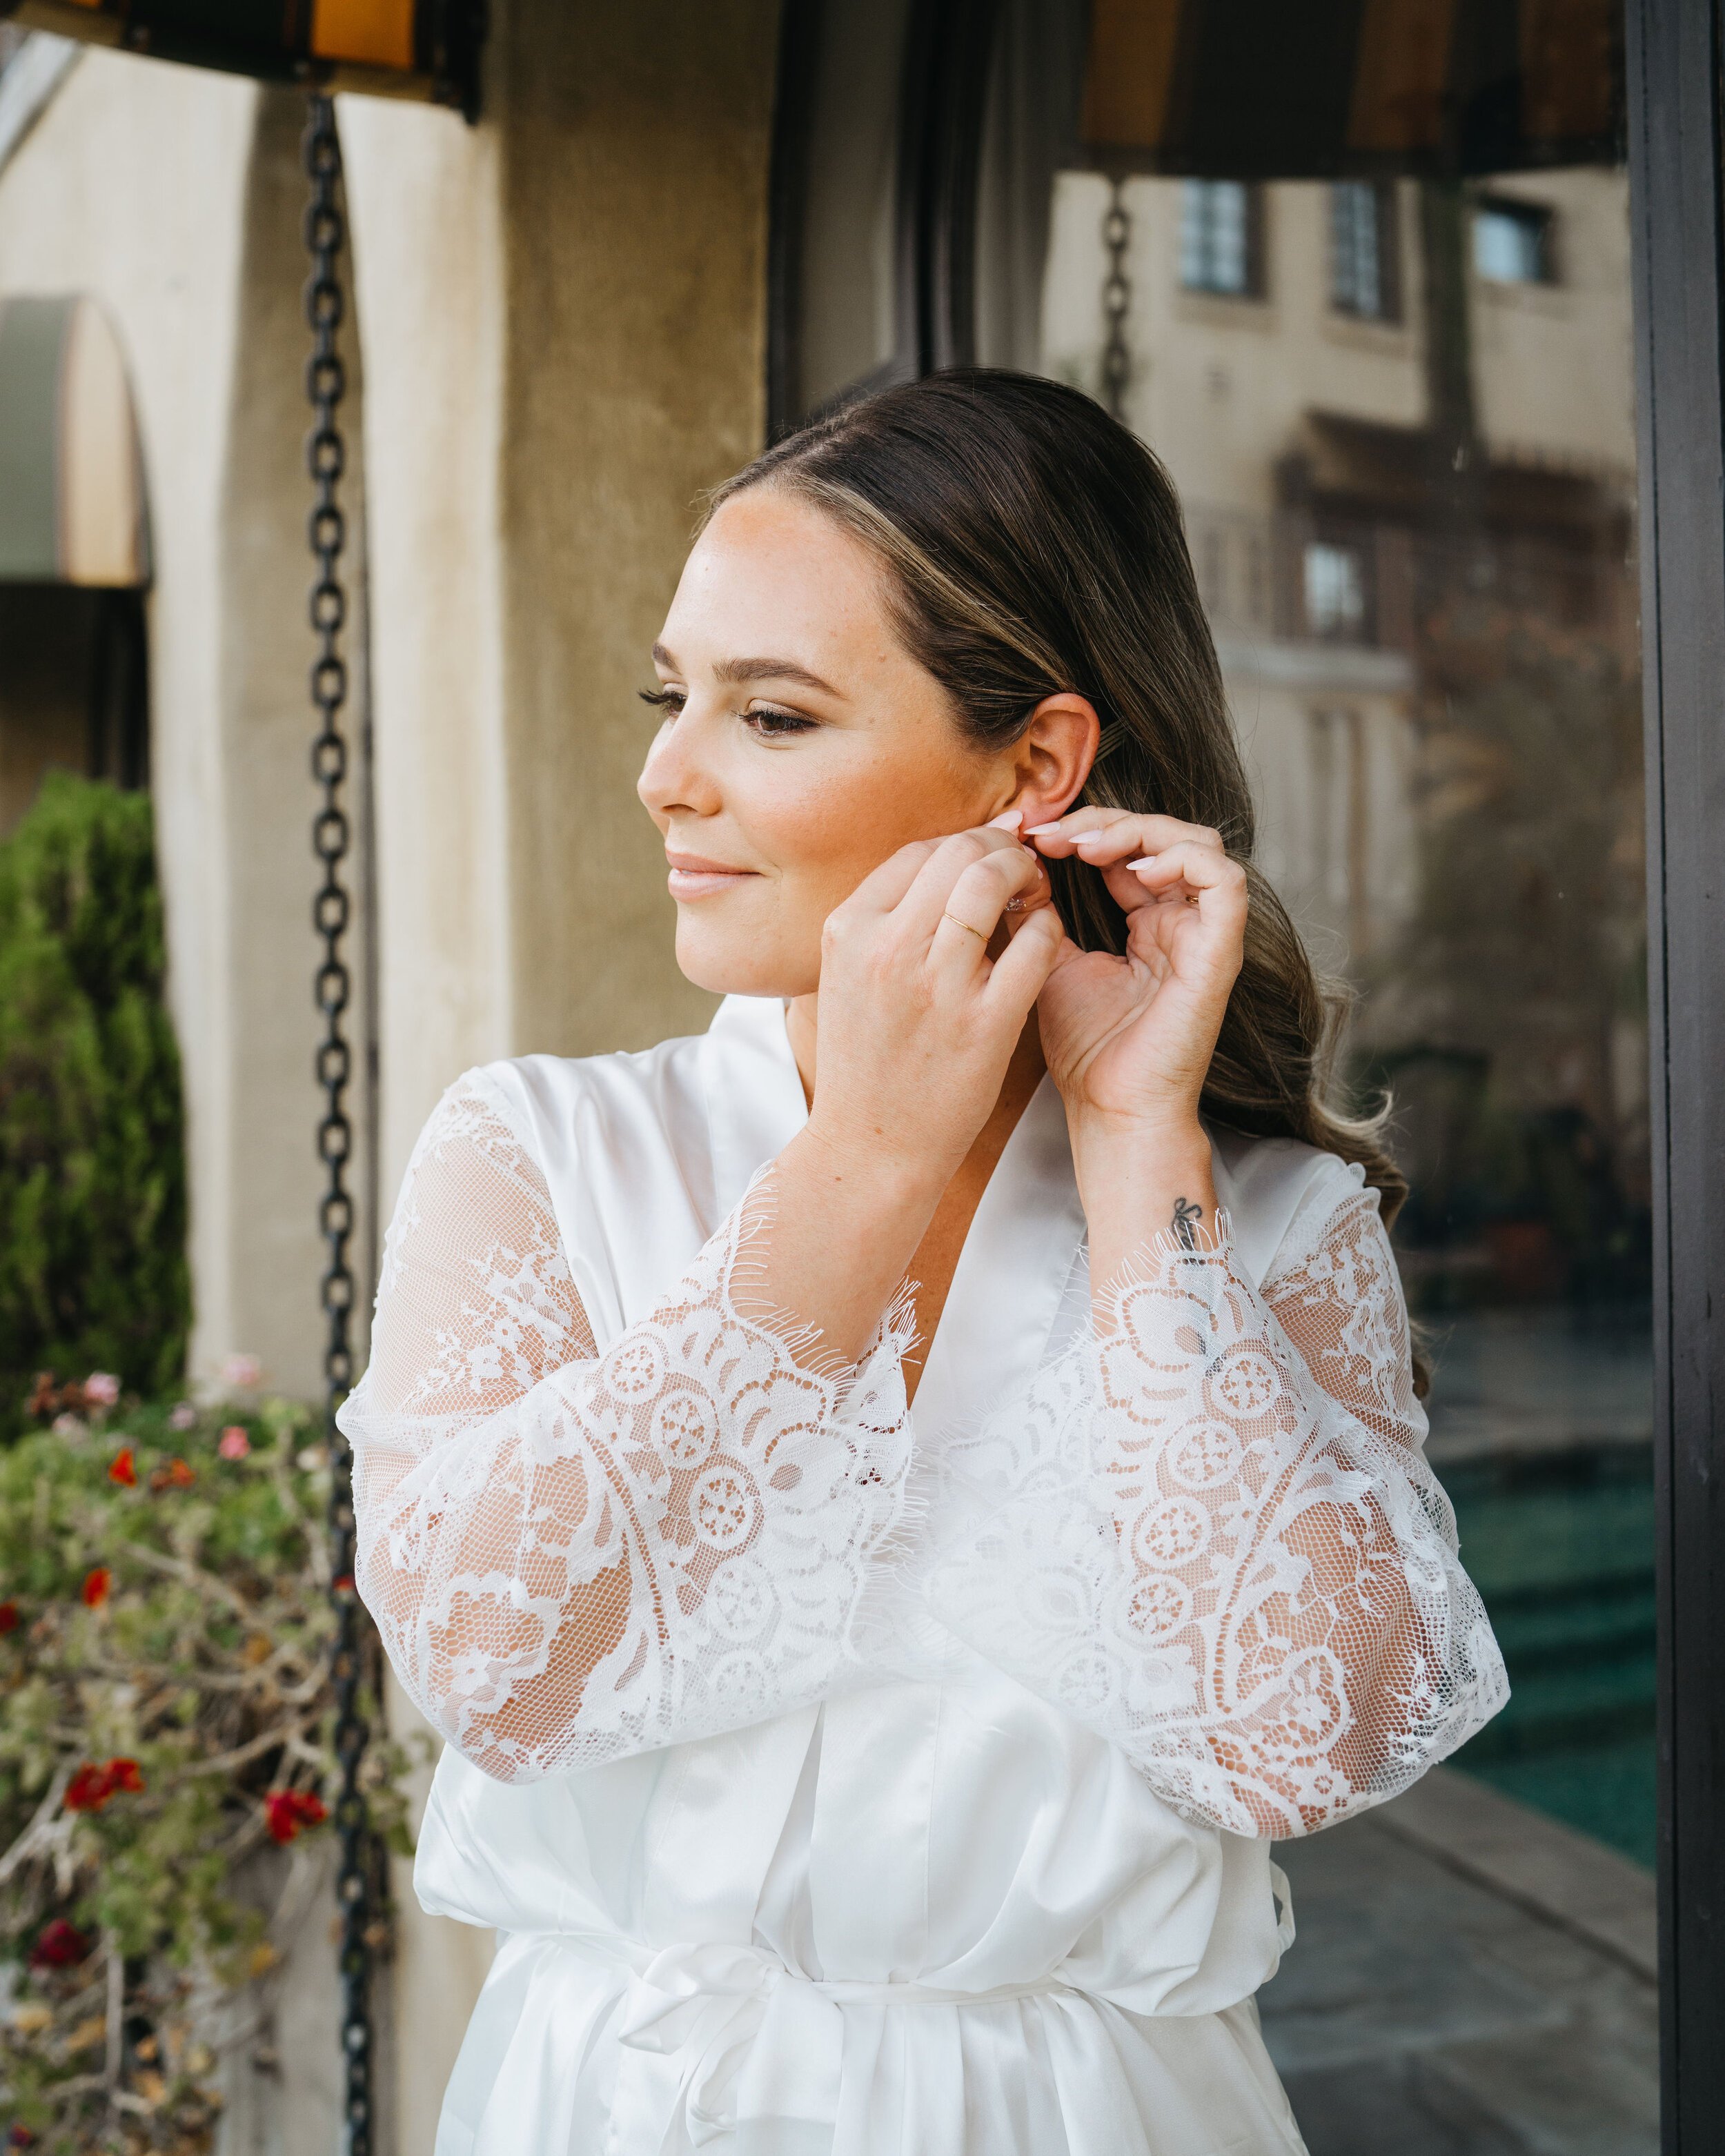 glowing airbrush makeup and romantic big curled hair for LA bride (Copy)